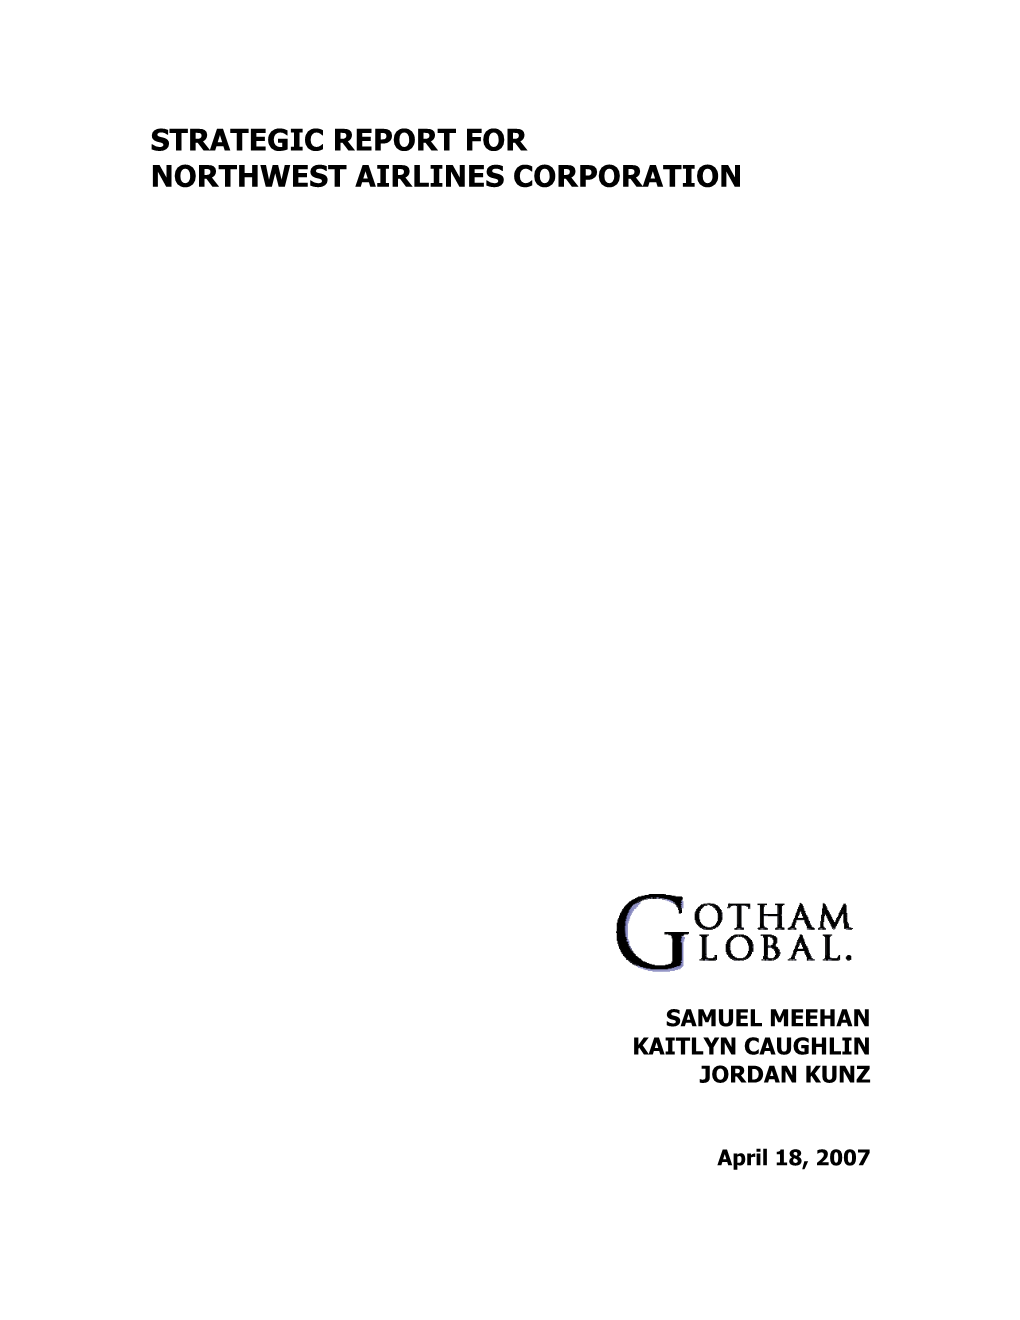 Strategic Report for Northwest Airlines Corporation